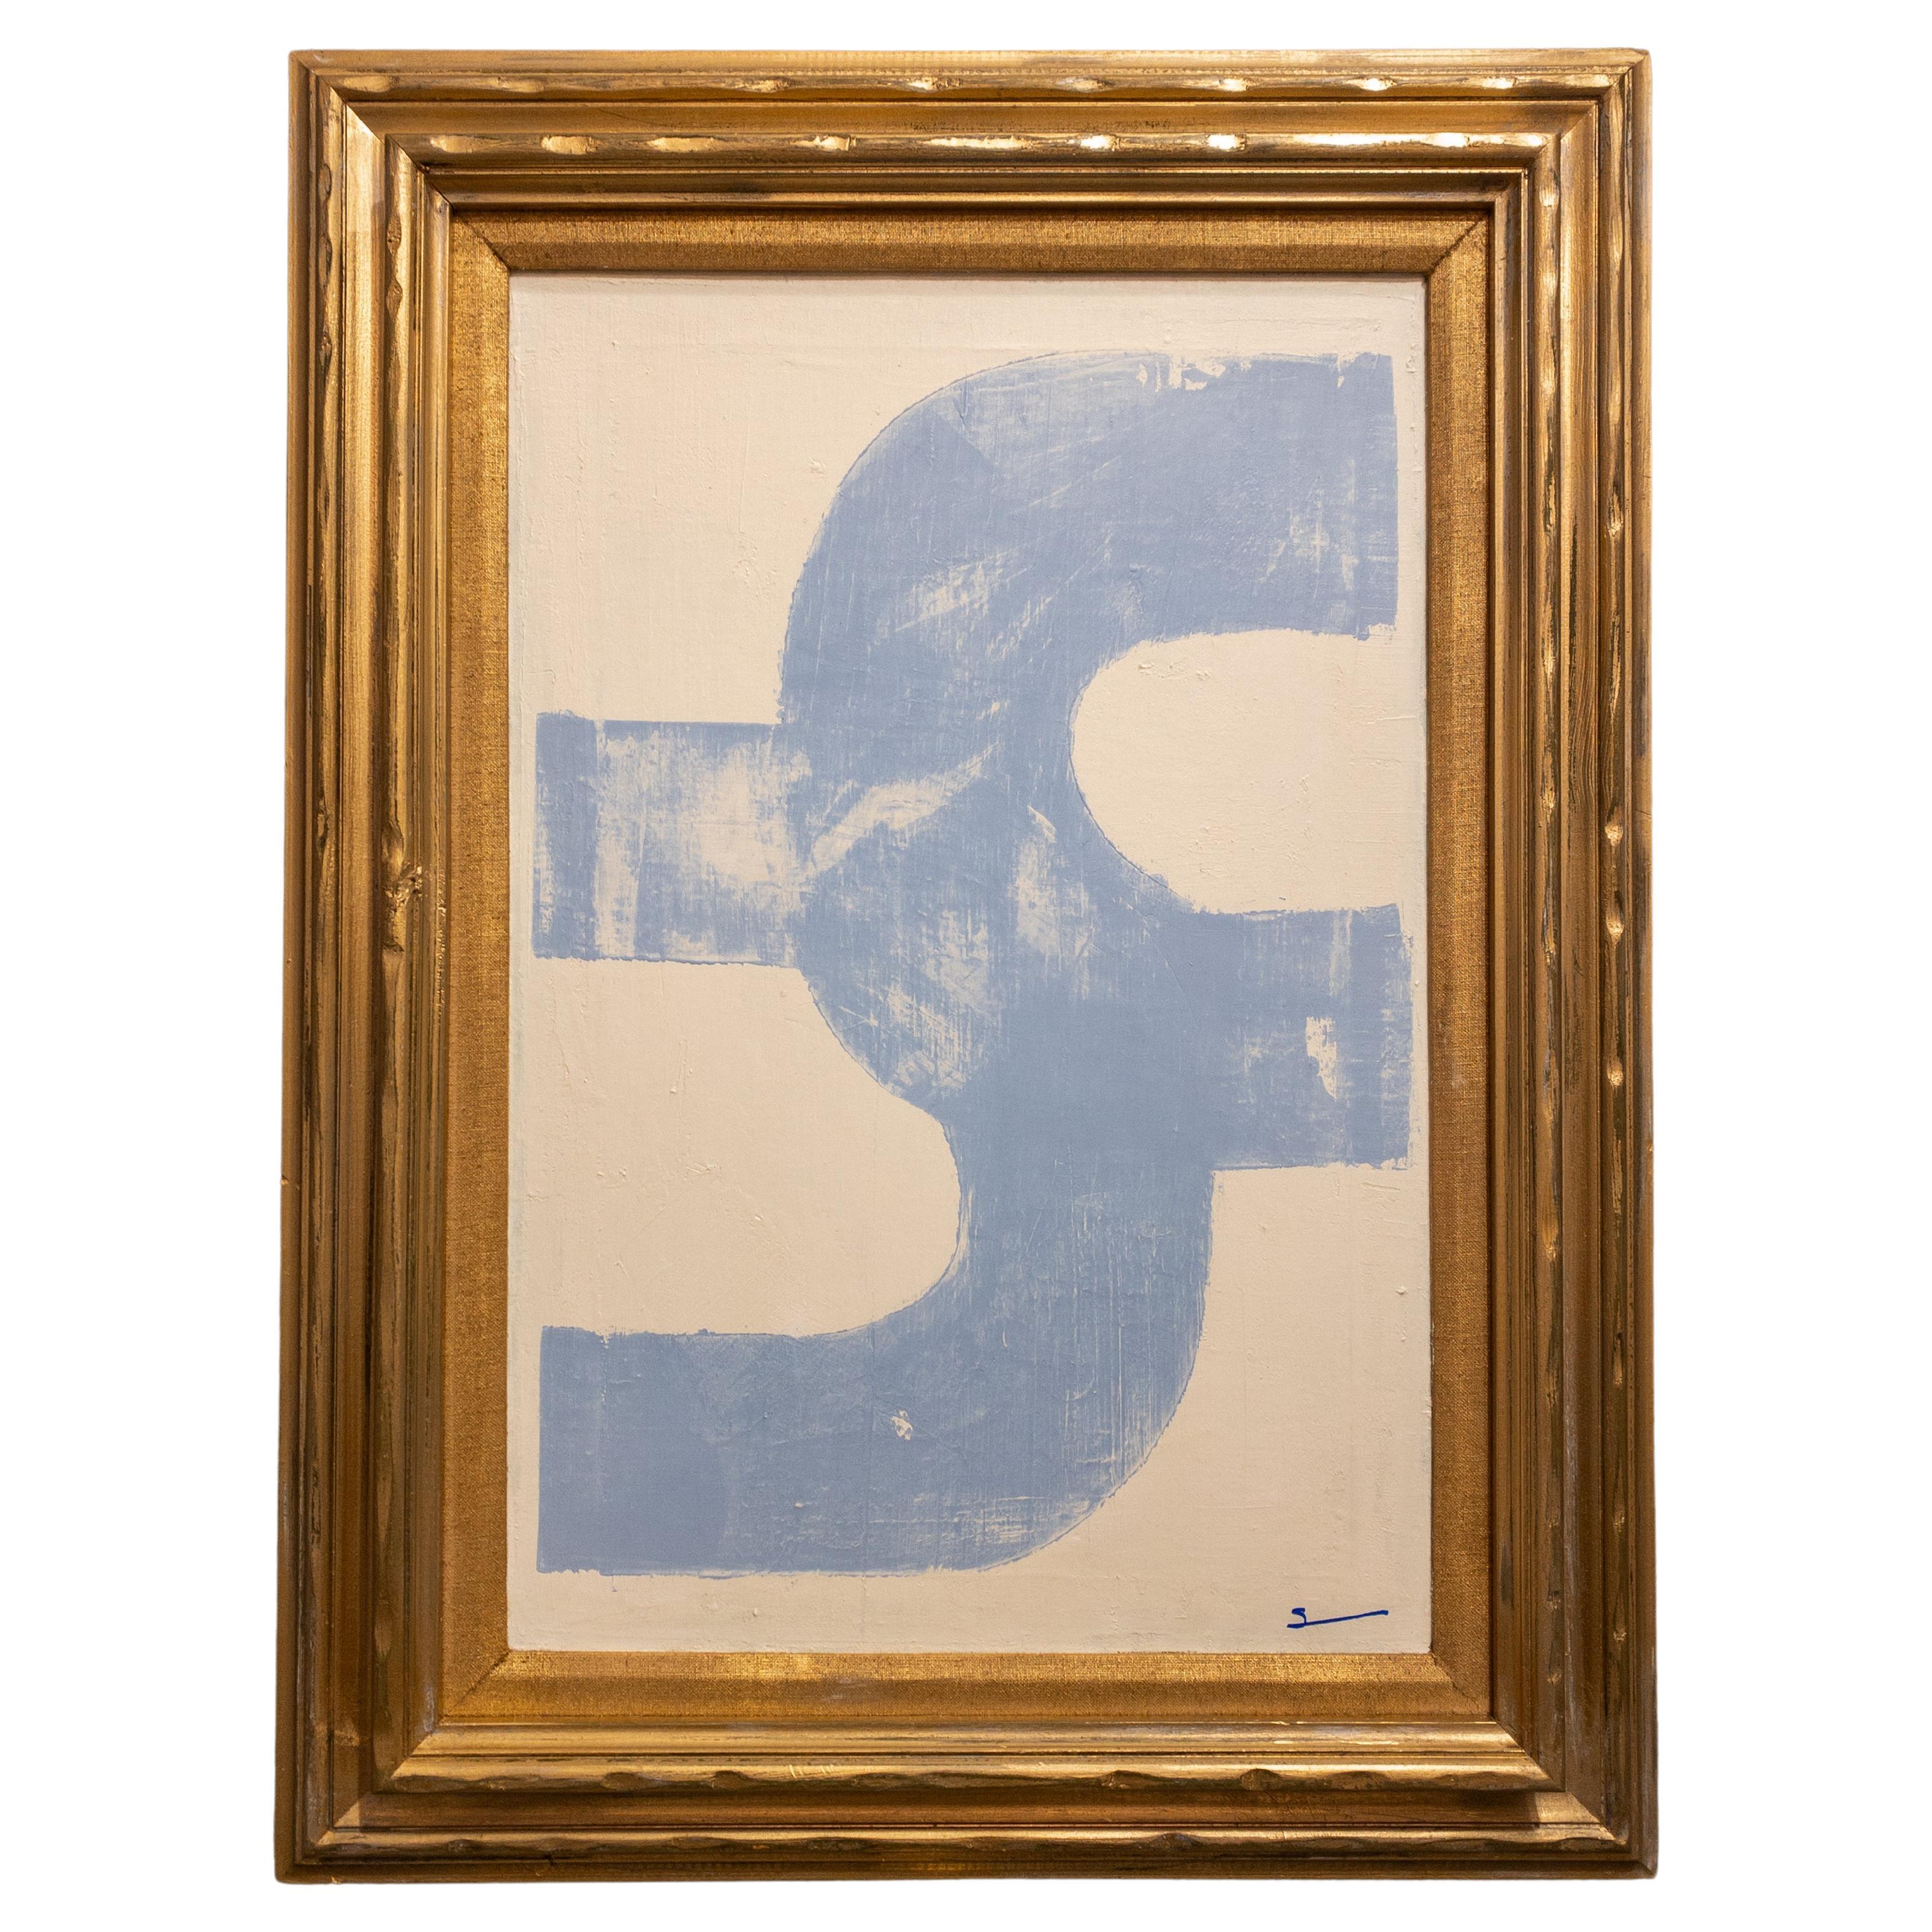 Original Modern Contemporary French Blue and White Painting in Antique Gilt Fram.